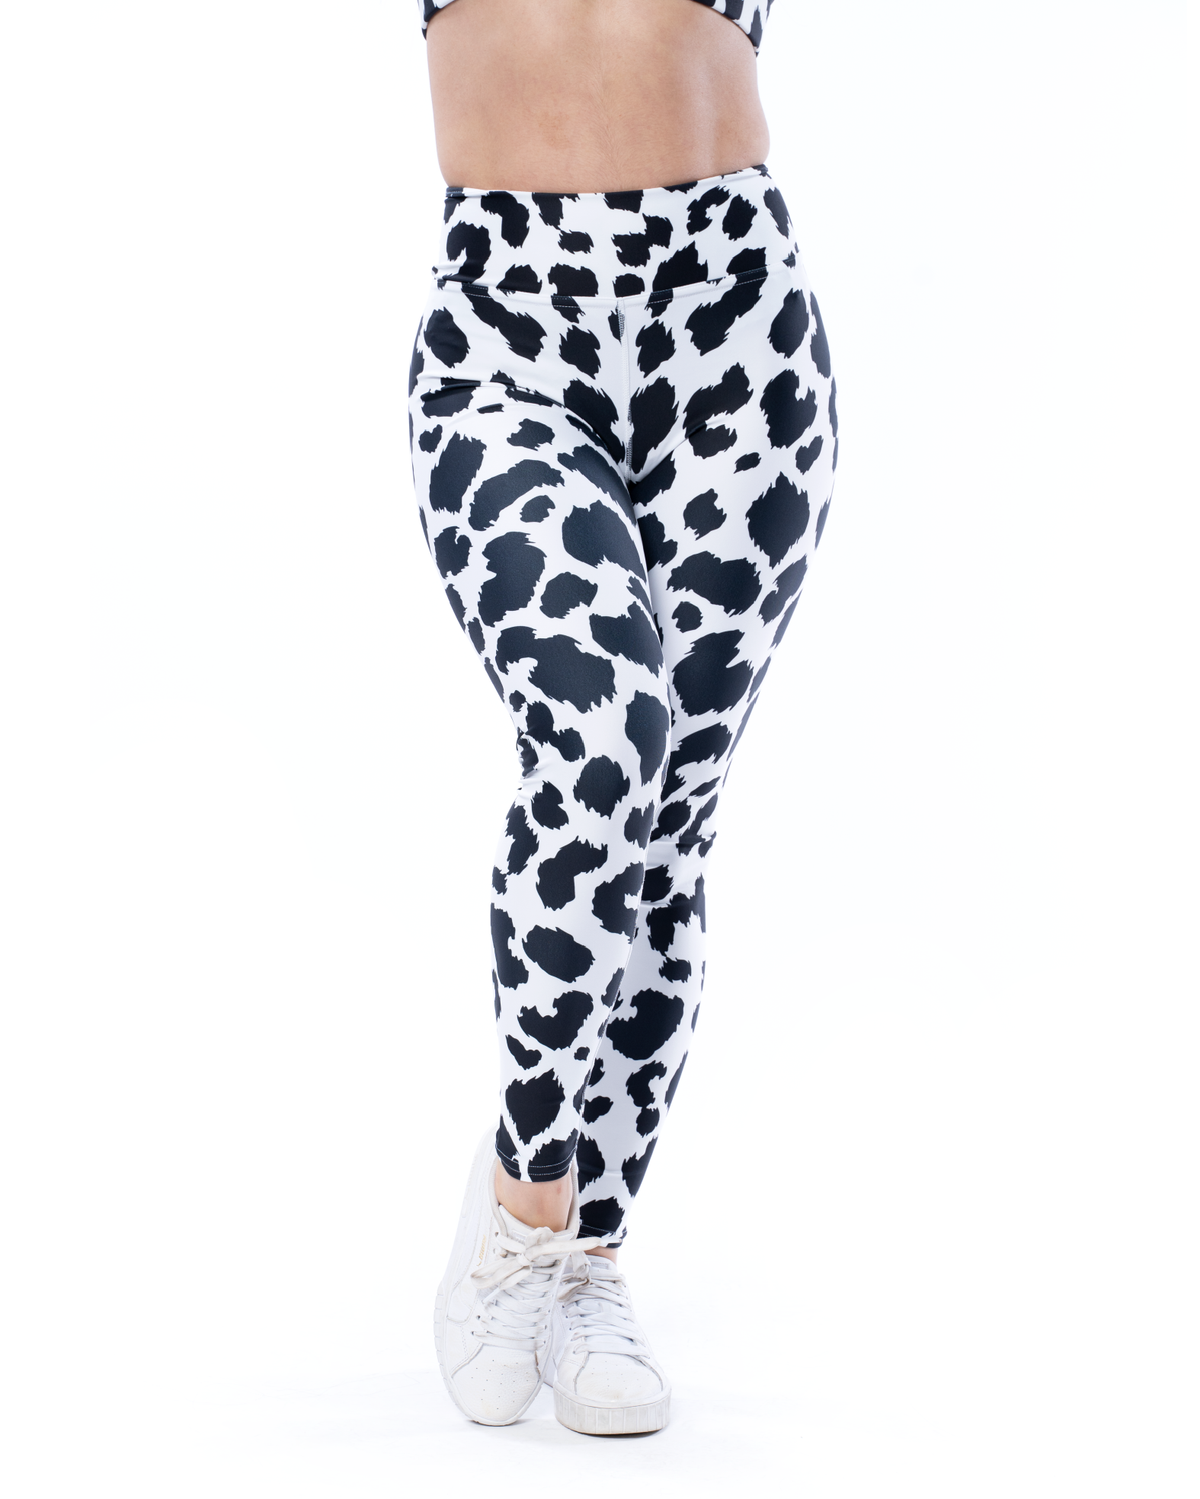 high waisted leggings in black and white animal pattern dolmation